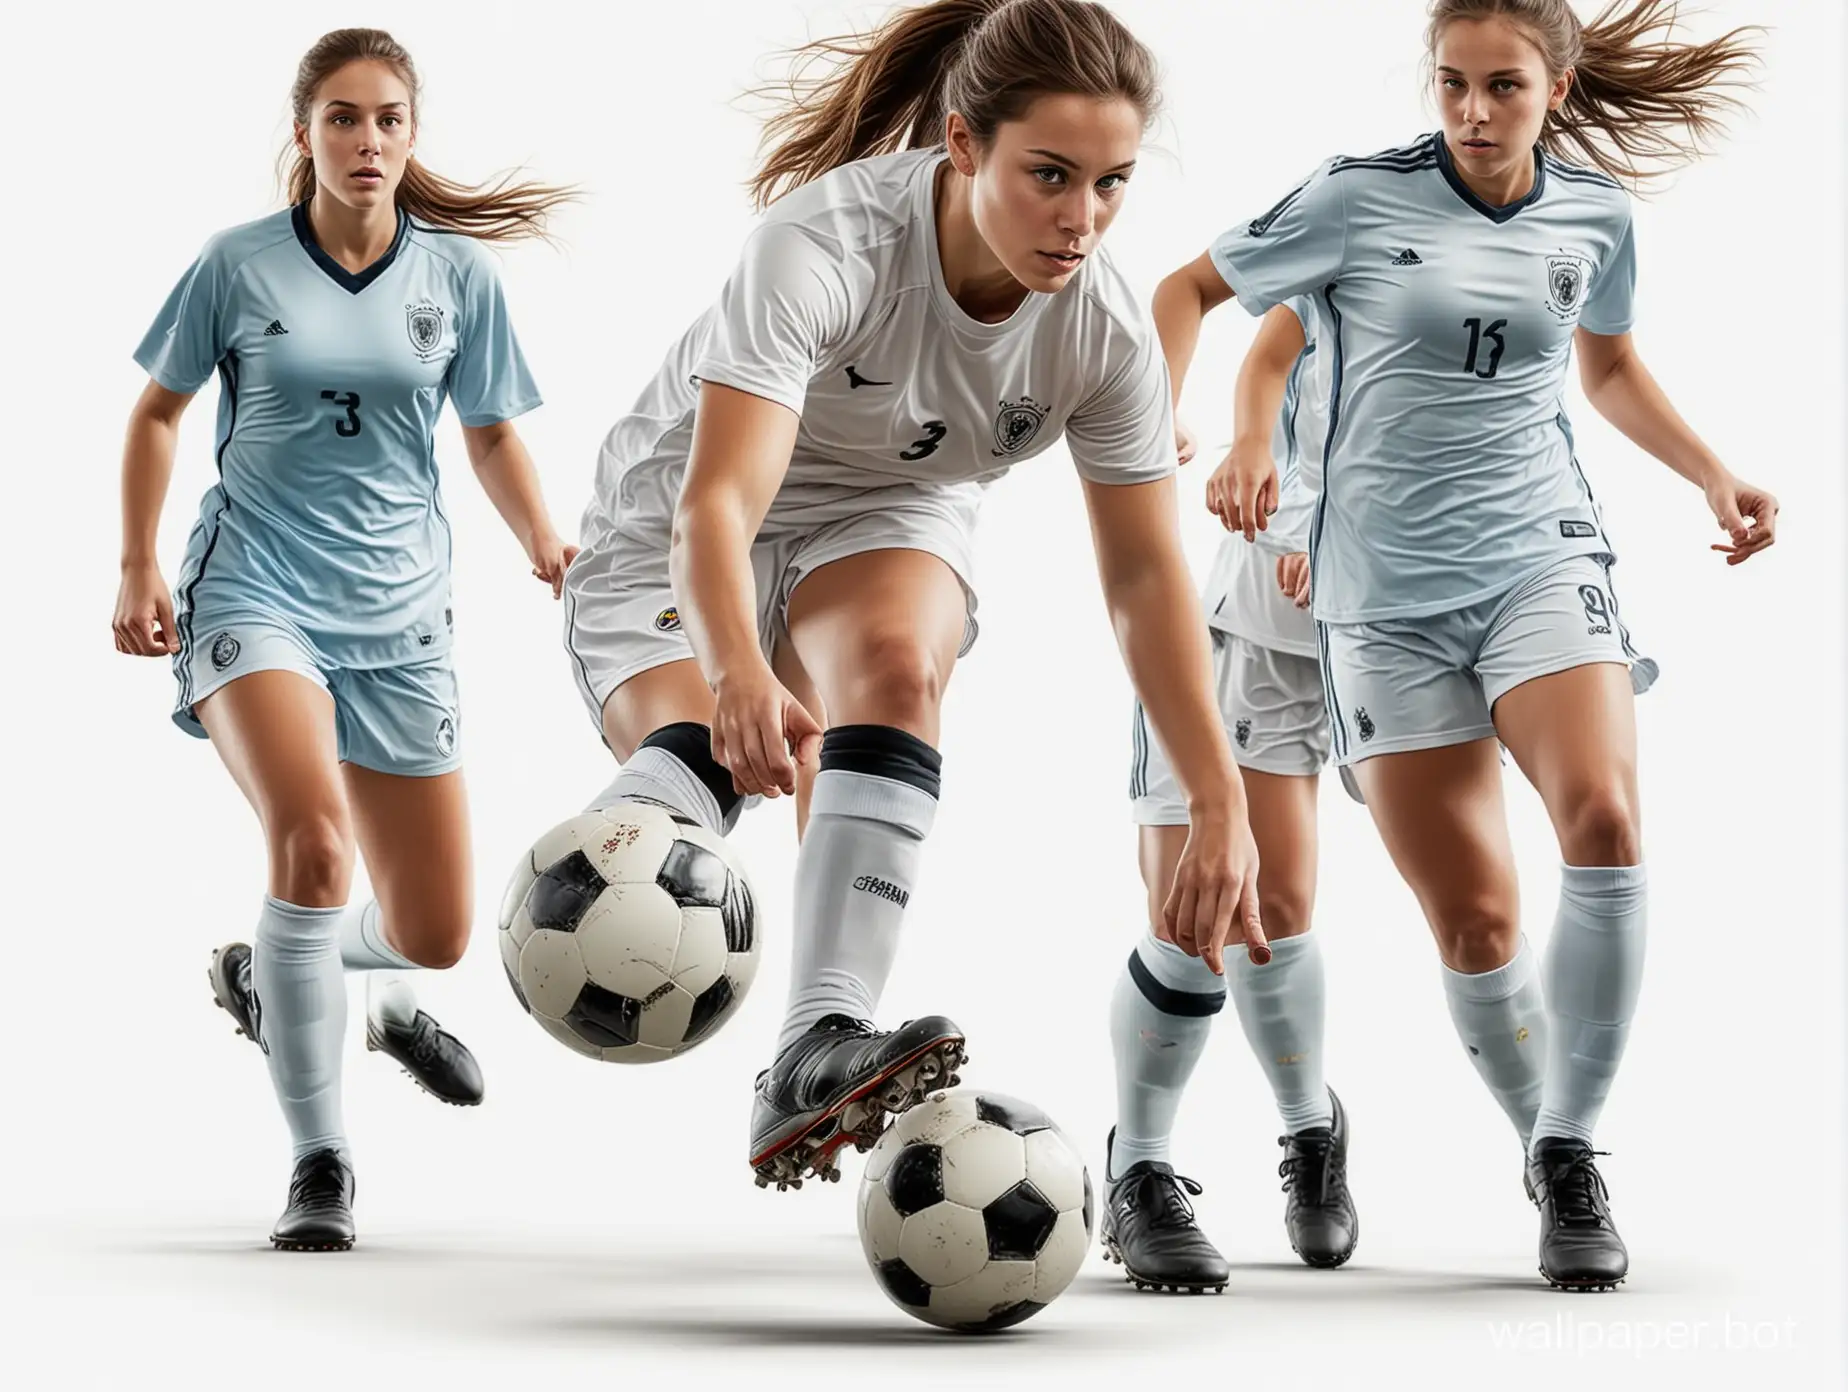 Three-Girls-Playing-Soccer-with-Realistic-Detail-on-White-Background